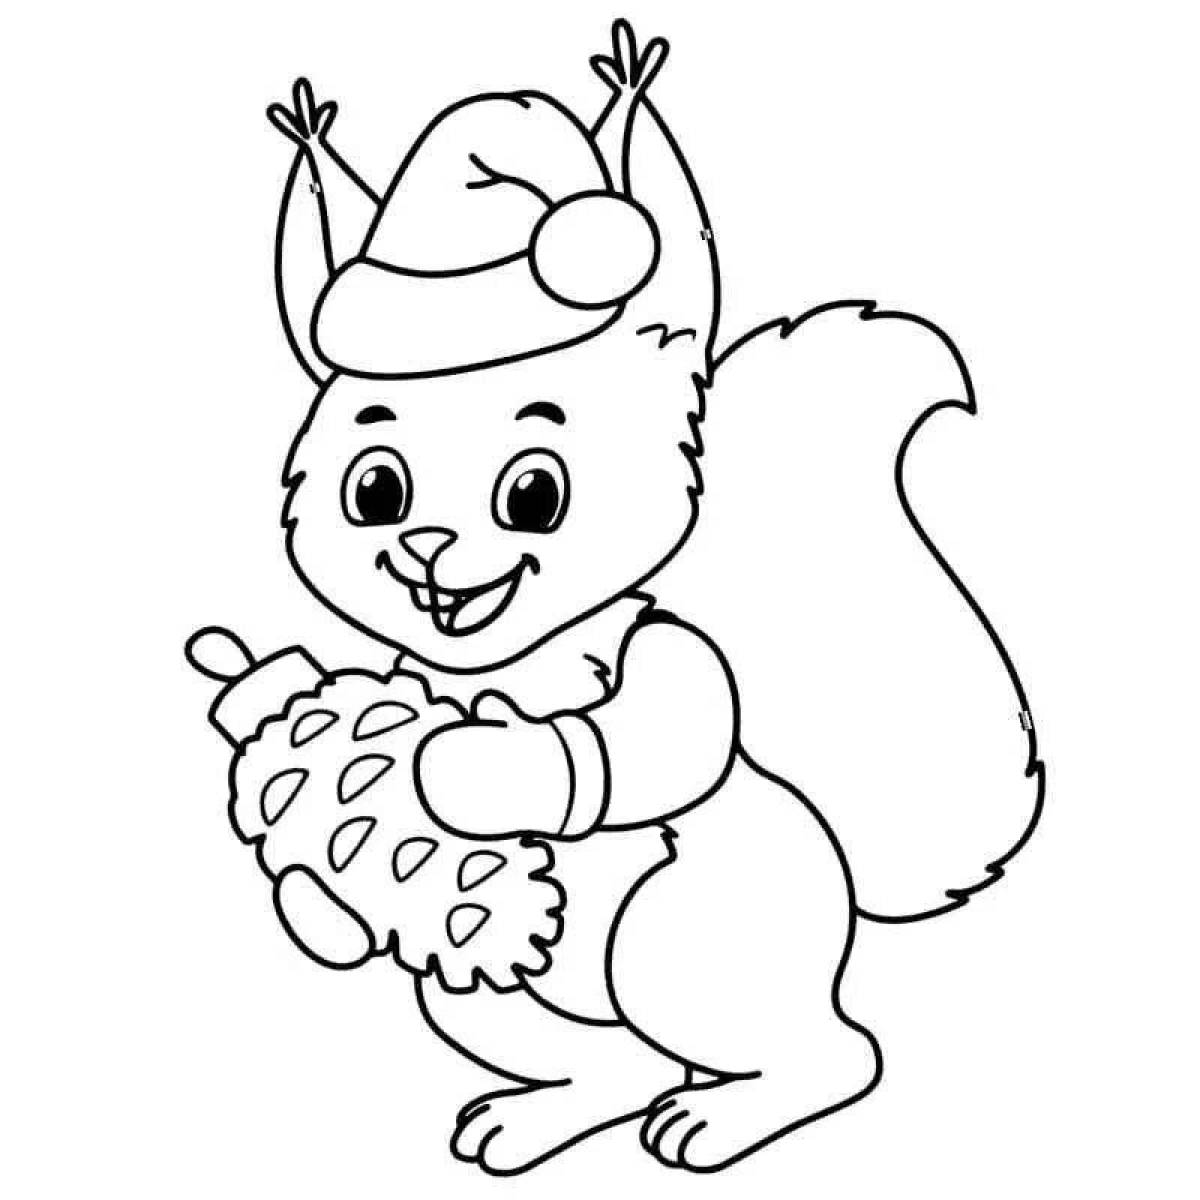 Cute squirrel coloring book for 3-4 year olds